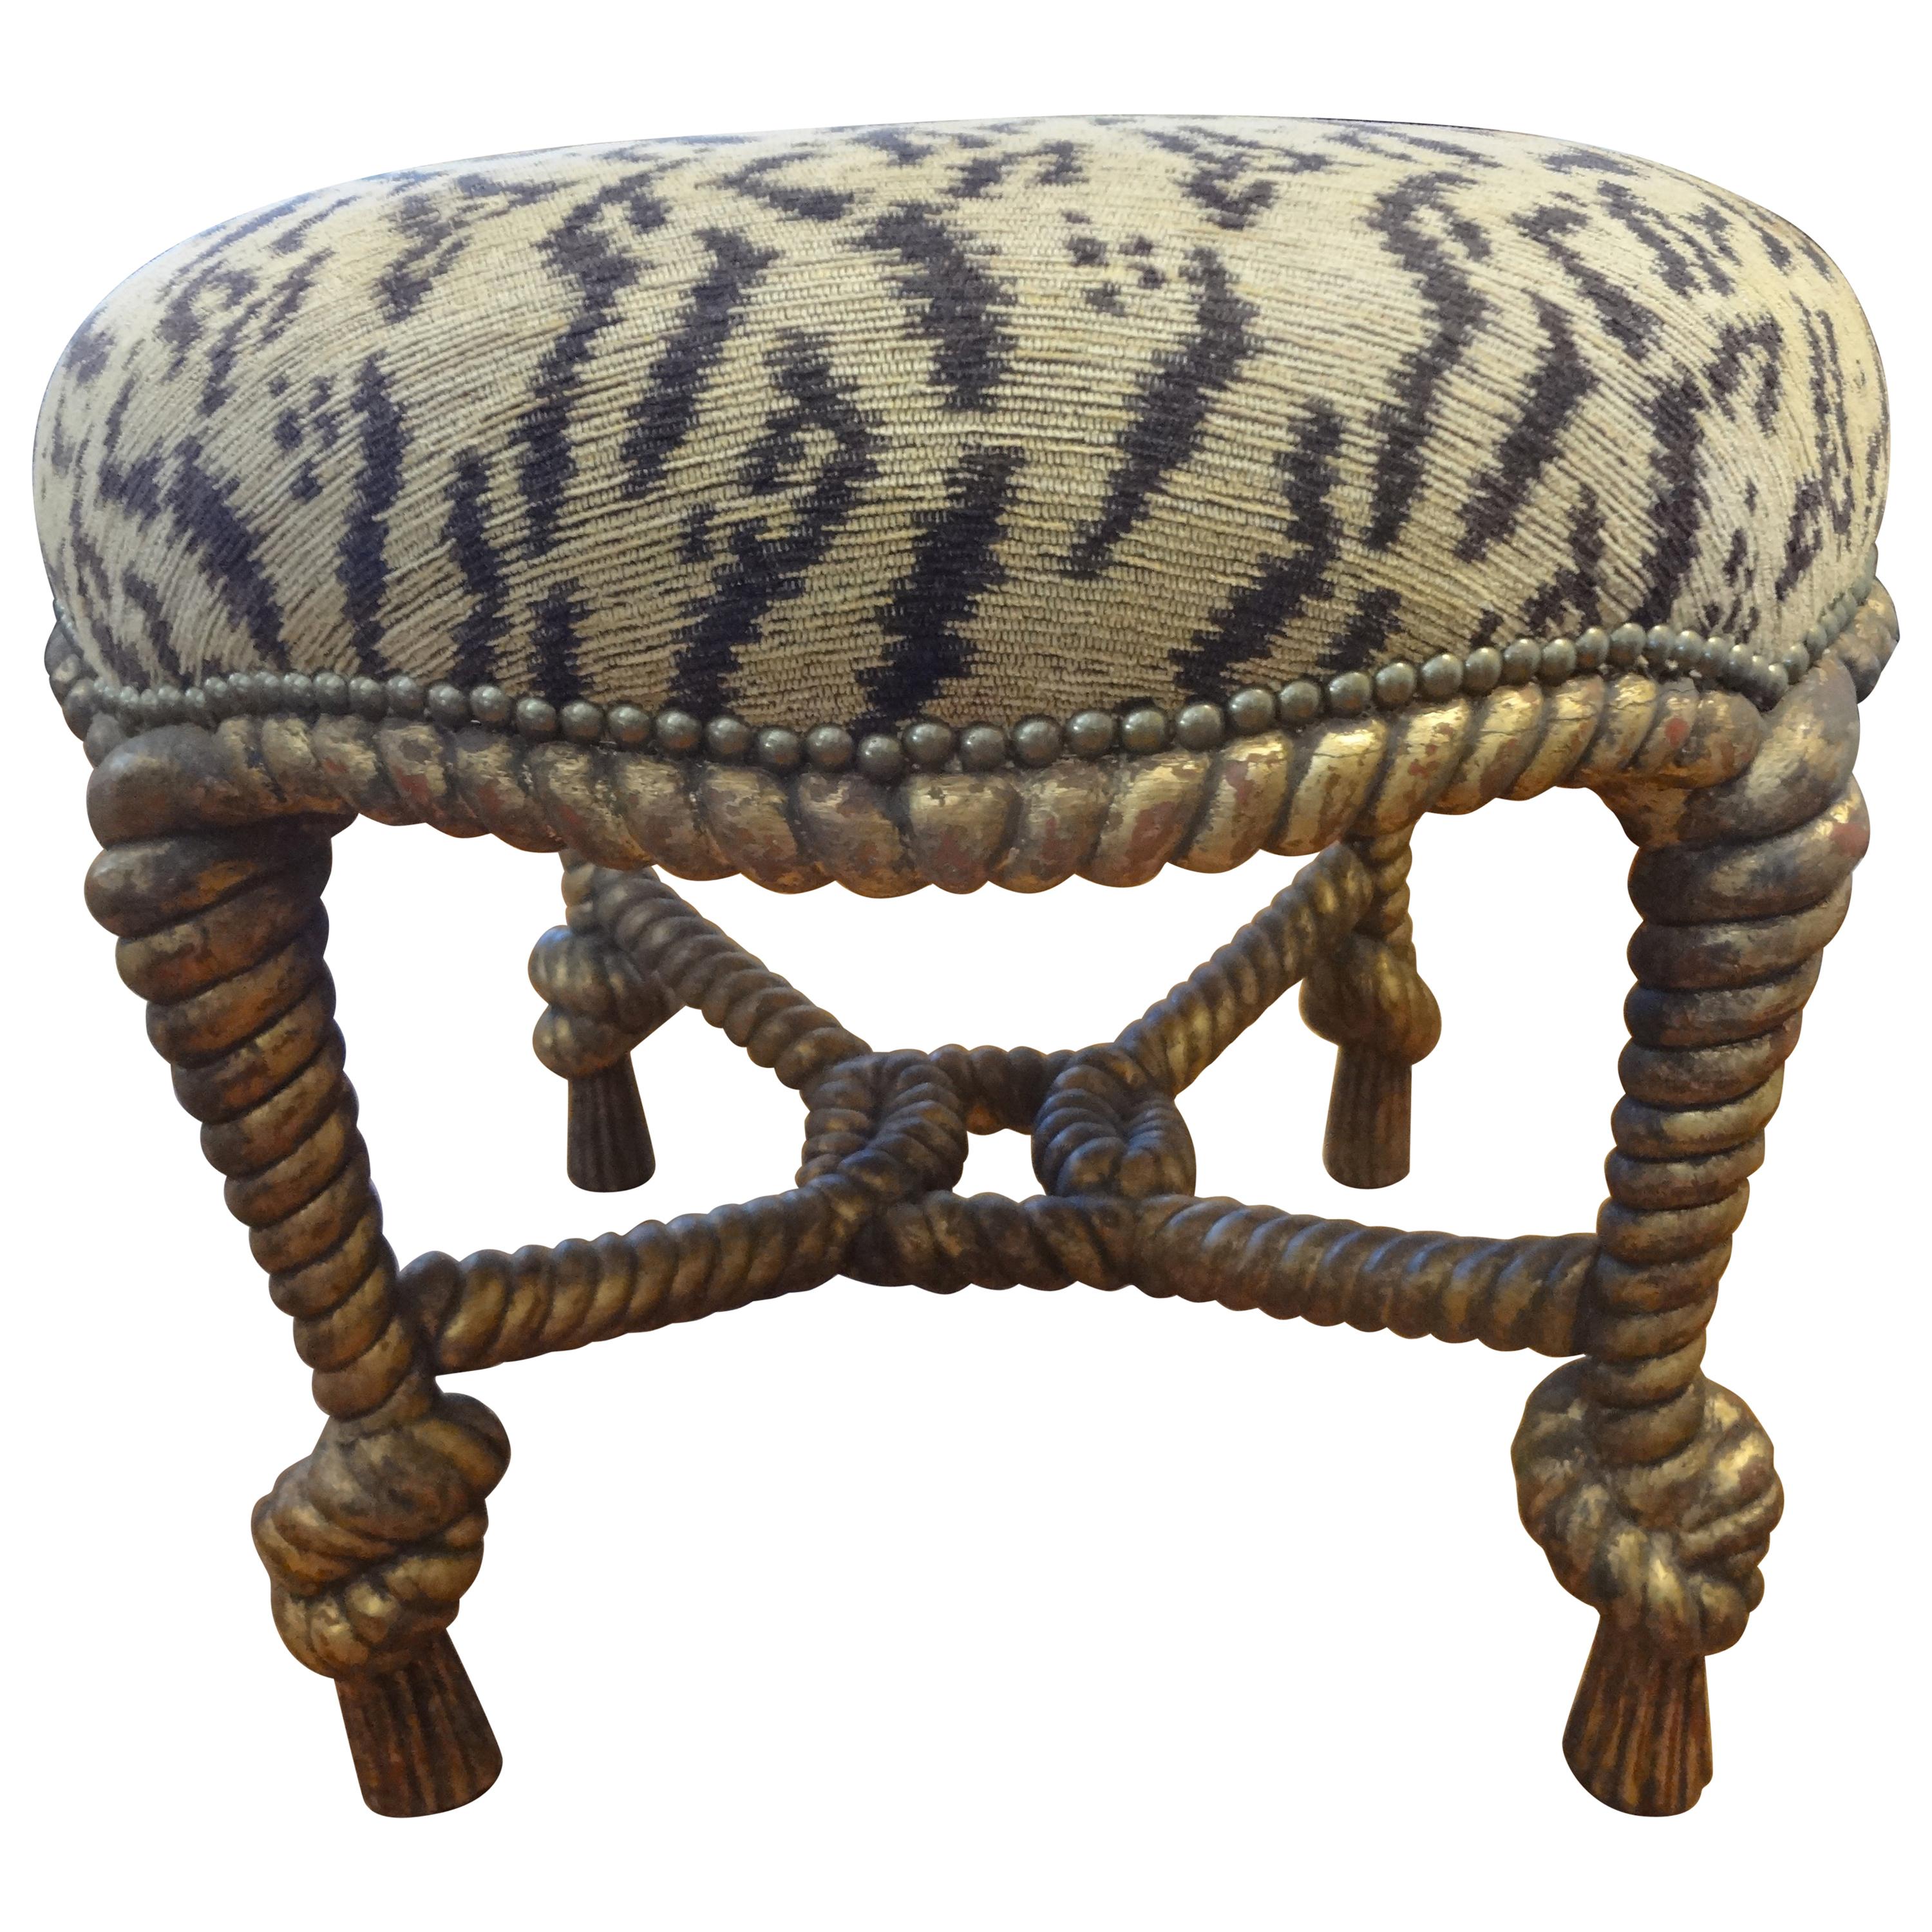 Italian Fournier Style Gilt Wood Knotted Rope and Tassel Ottoman